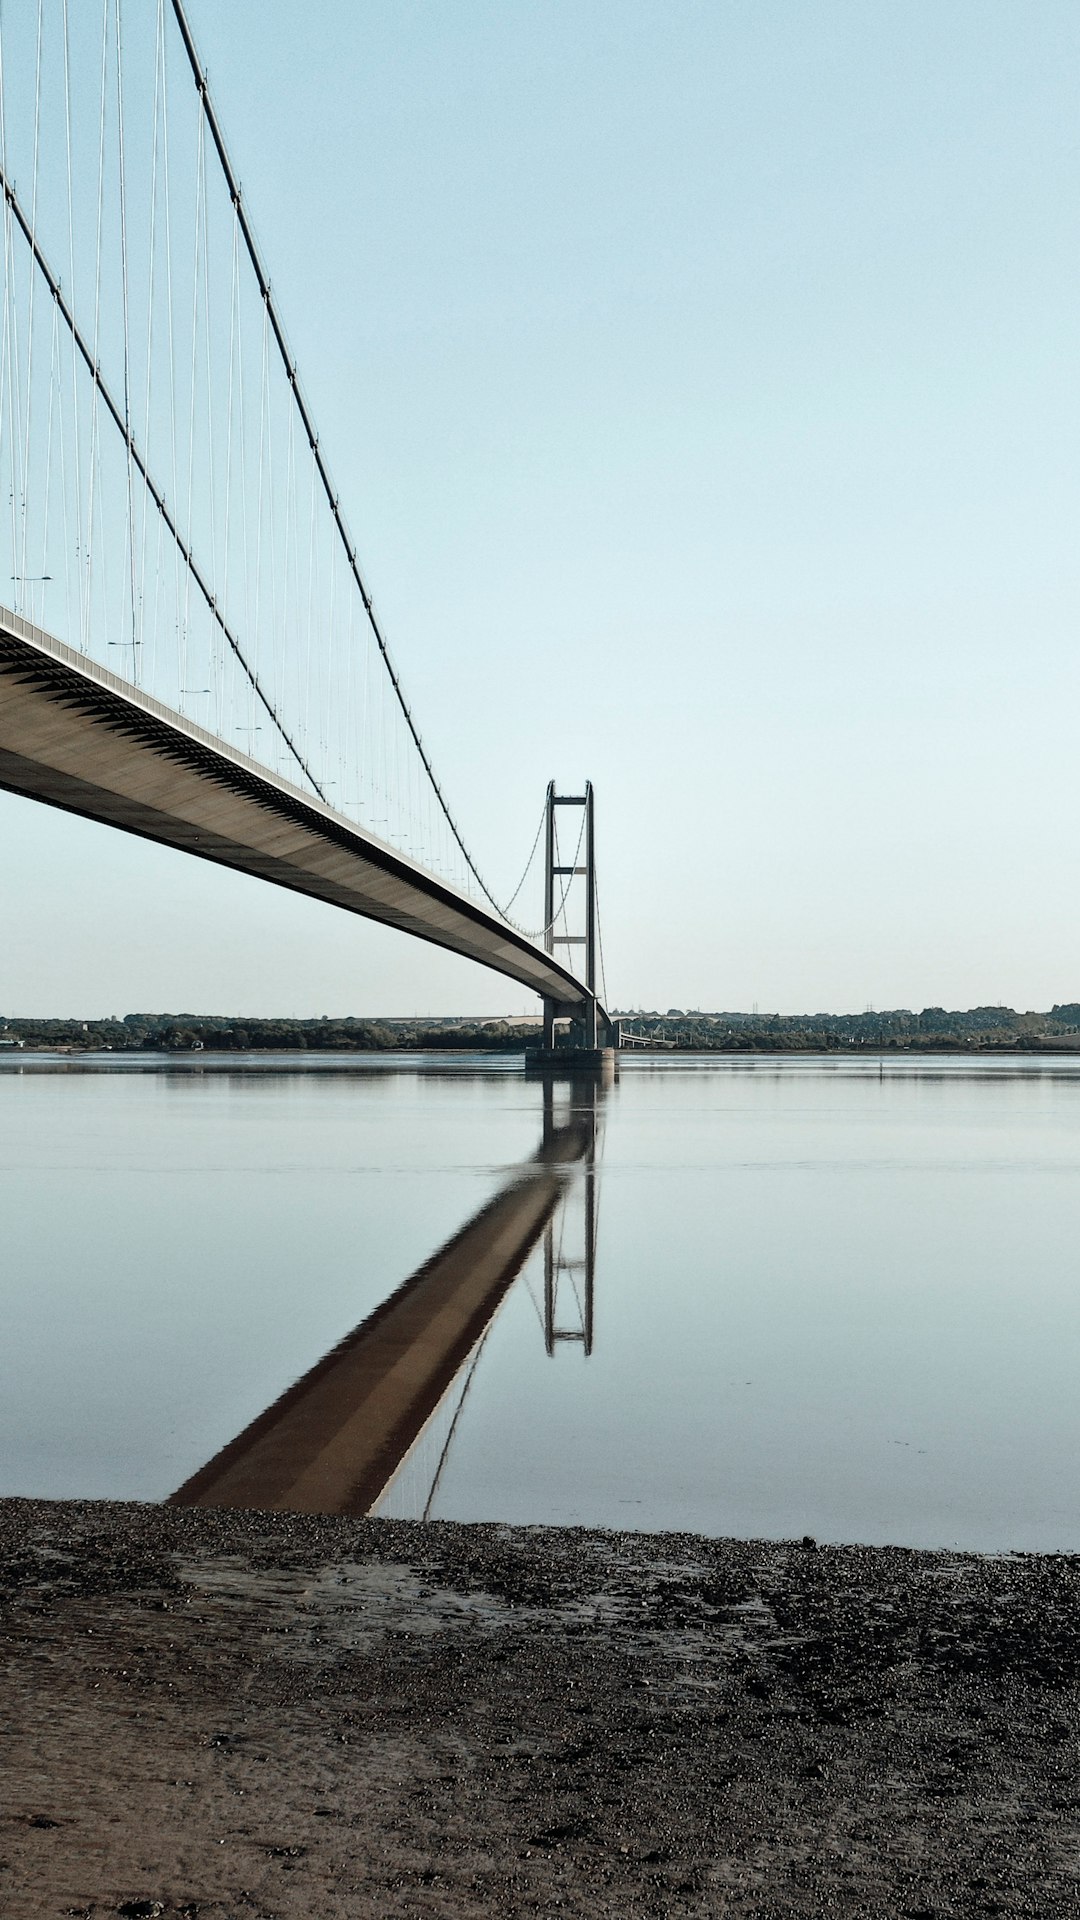 Travel Tips and Stories of The Humber Bridge in United Kingdom